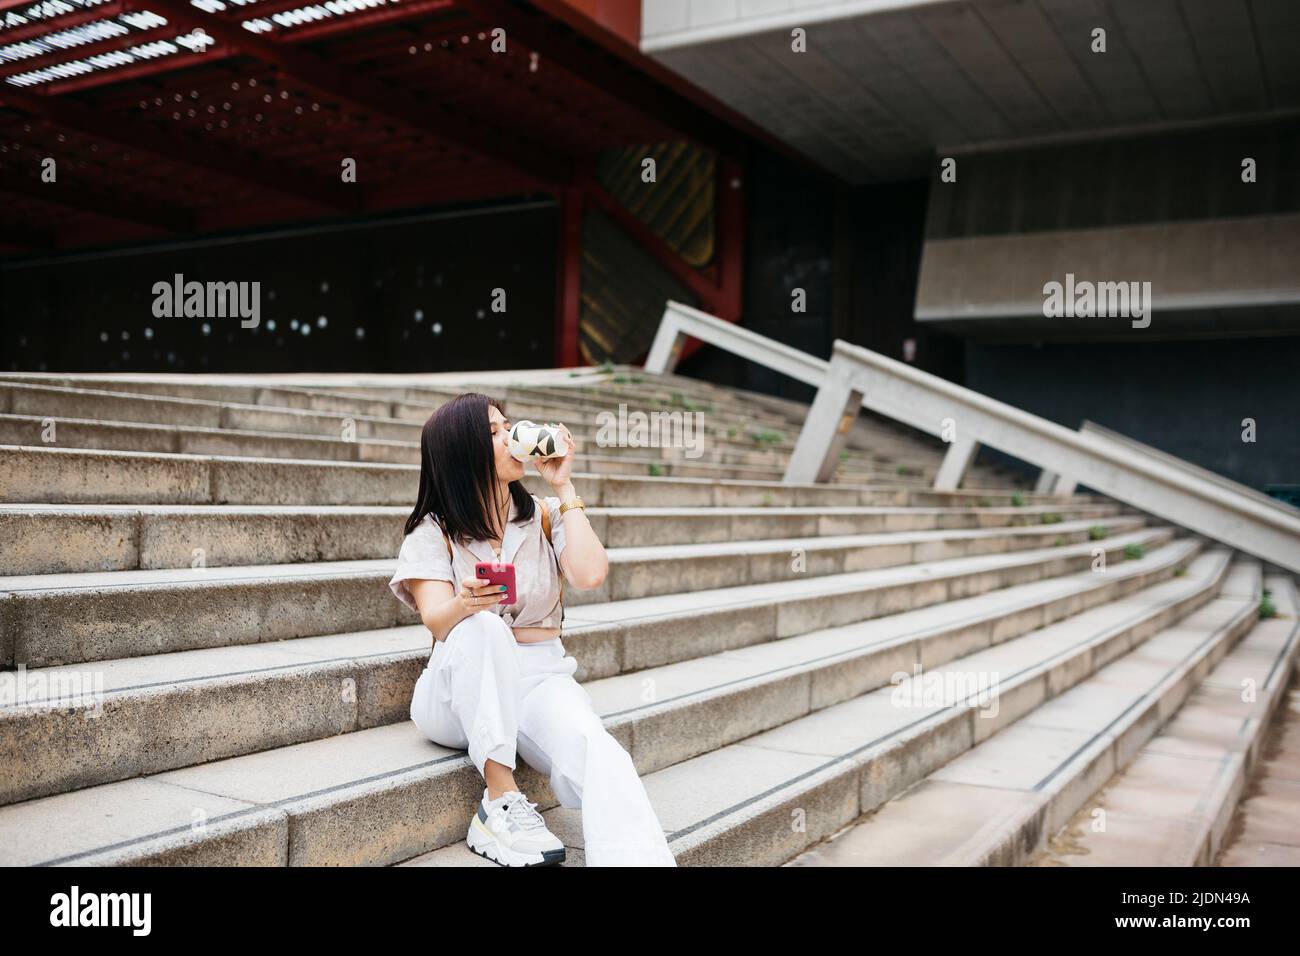 Young brunette woman sitting on stairs drinking coffee and using a phone Stock Photo